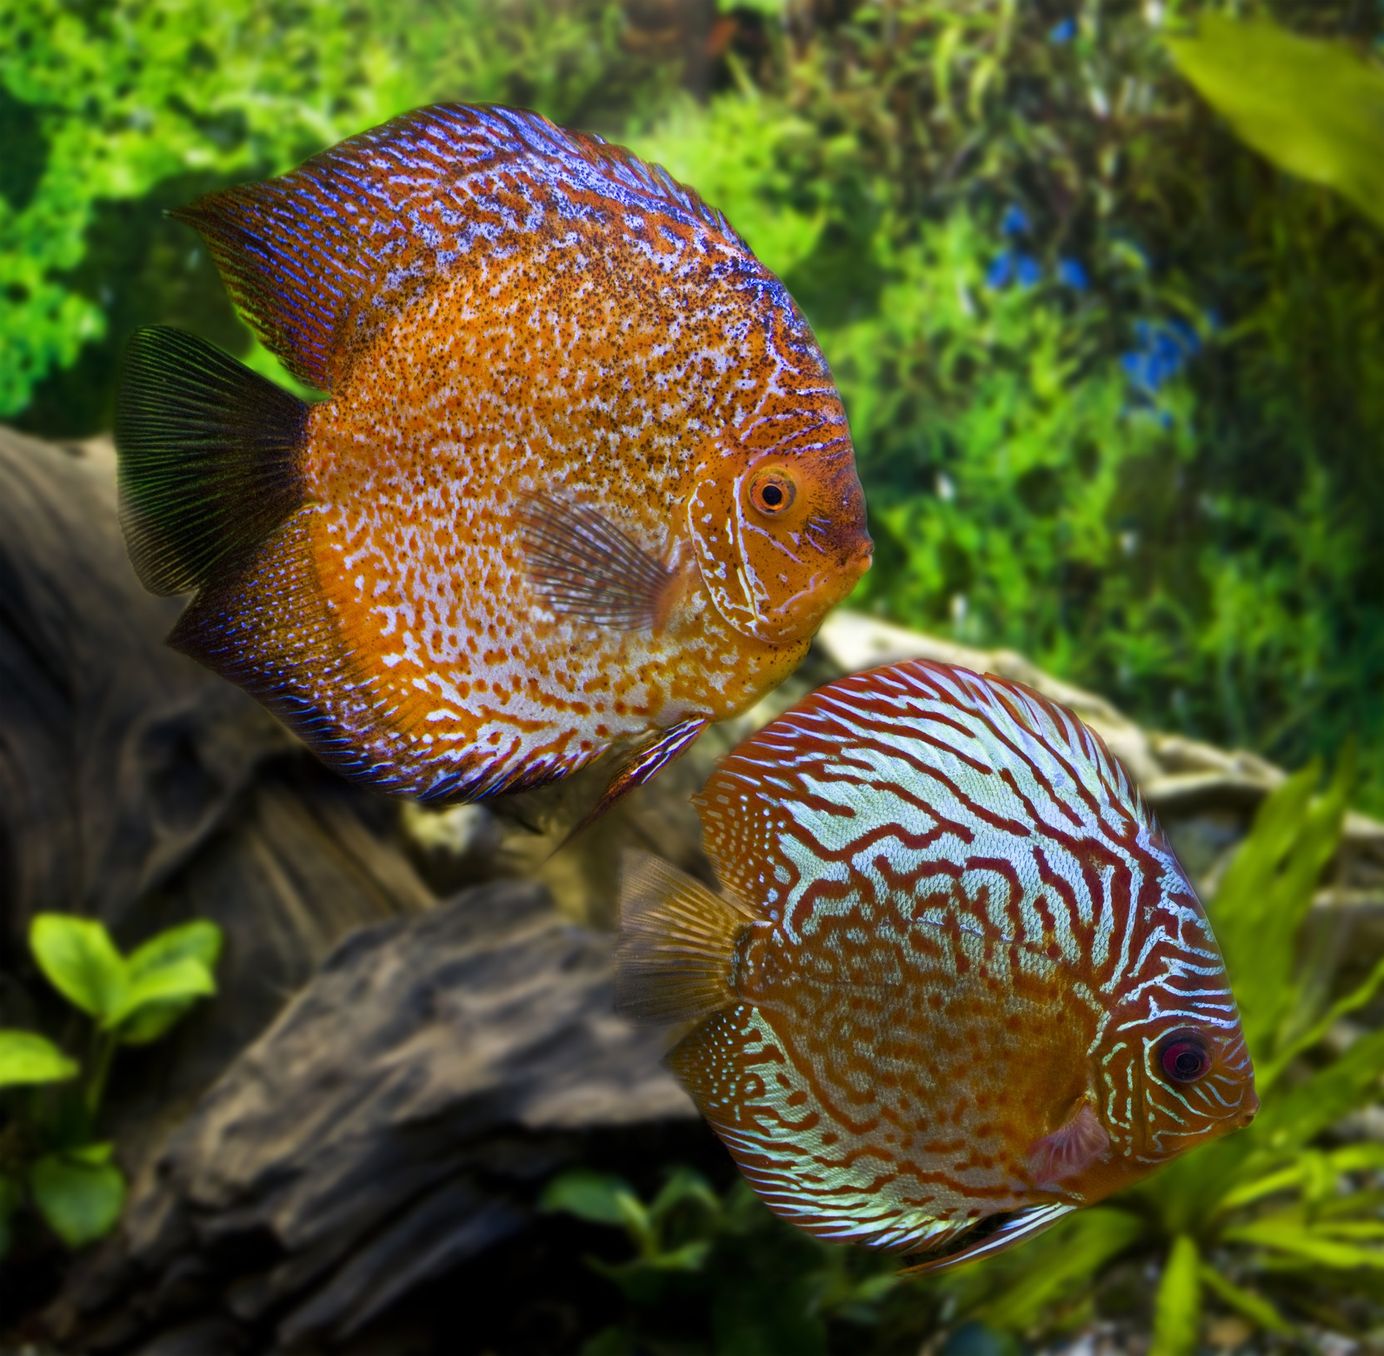 Discus fish are by far the most popular of the South American cichlids